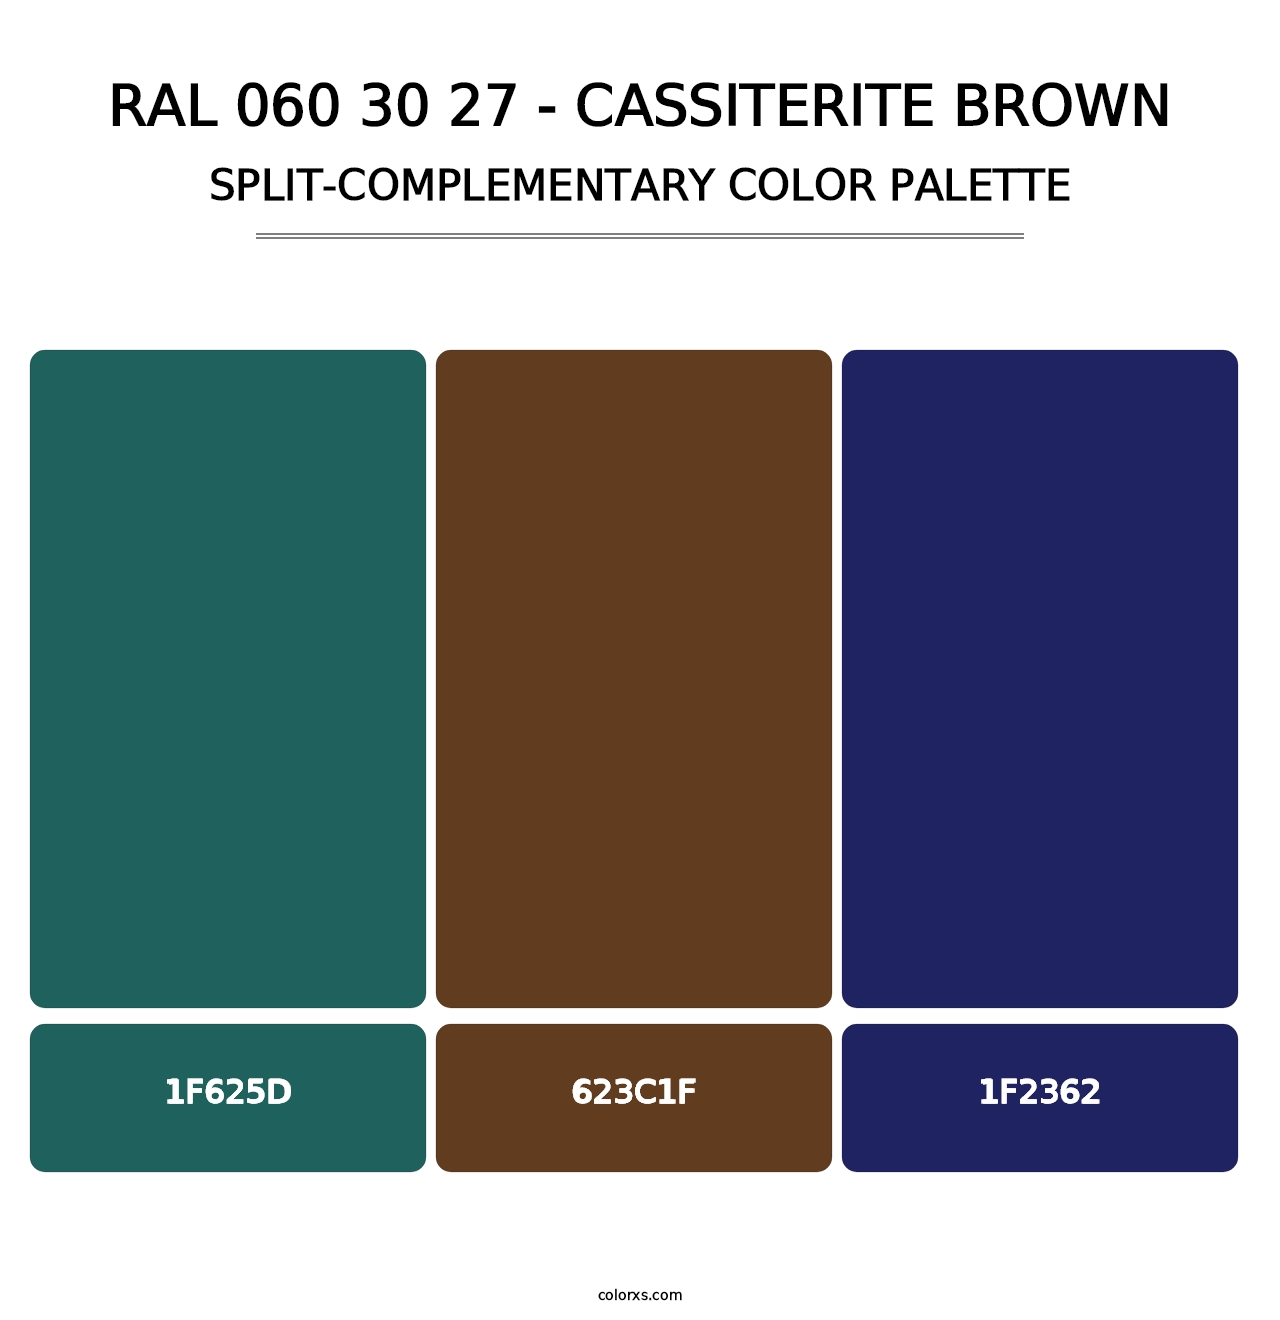 RAL 060 30 27 - Cassiterite Brown - Split-Complementary Color Palette